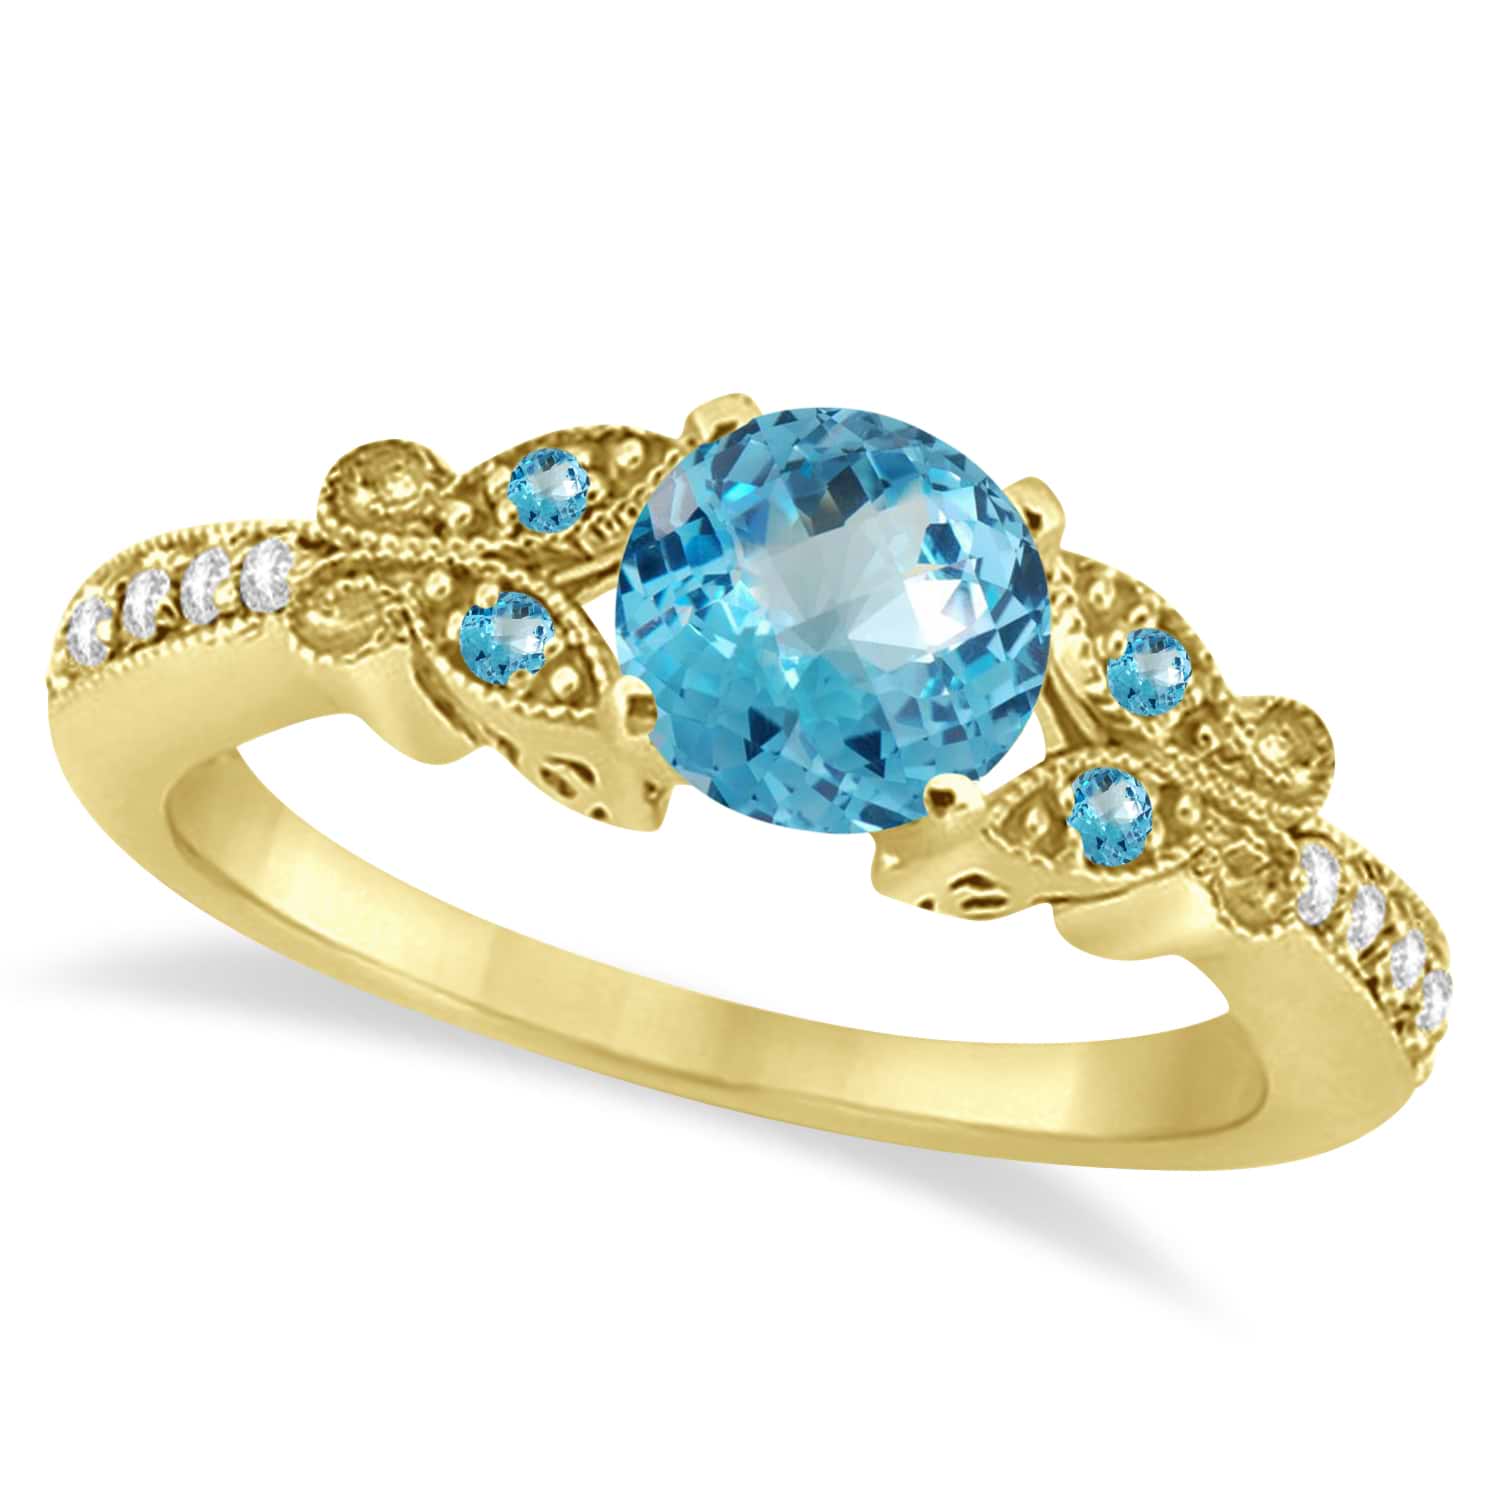 Butterfly Blue Topaz & Diamond Engagement Ring 14k Yellow Gold (1.78ct)